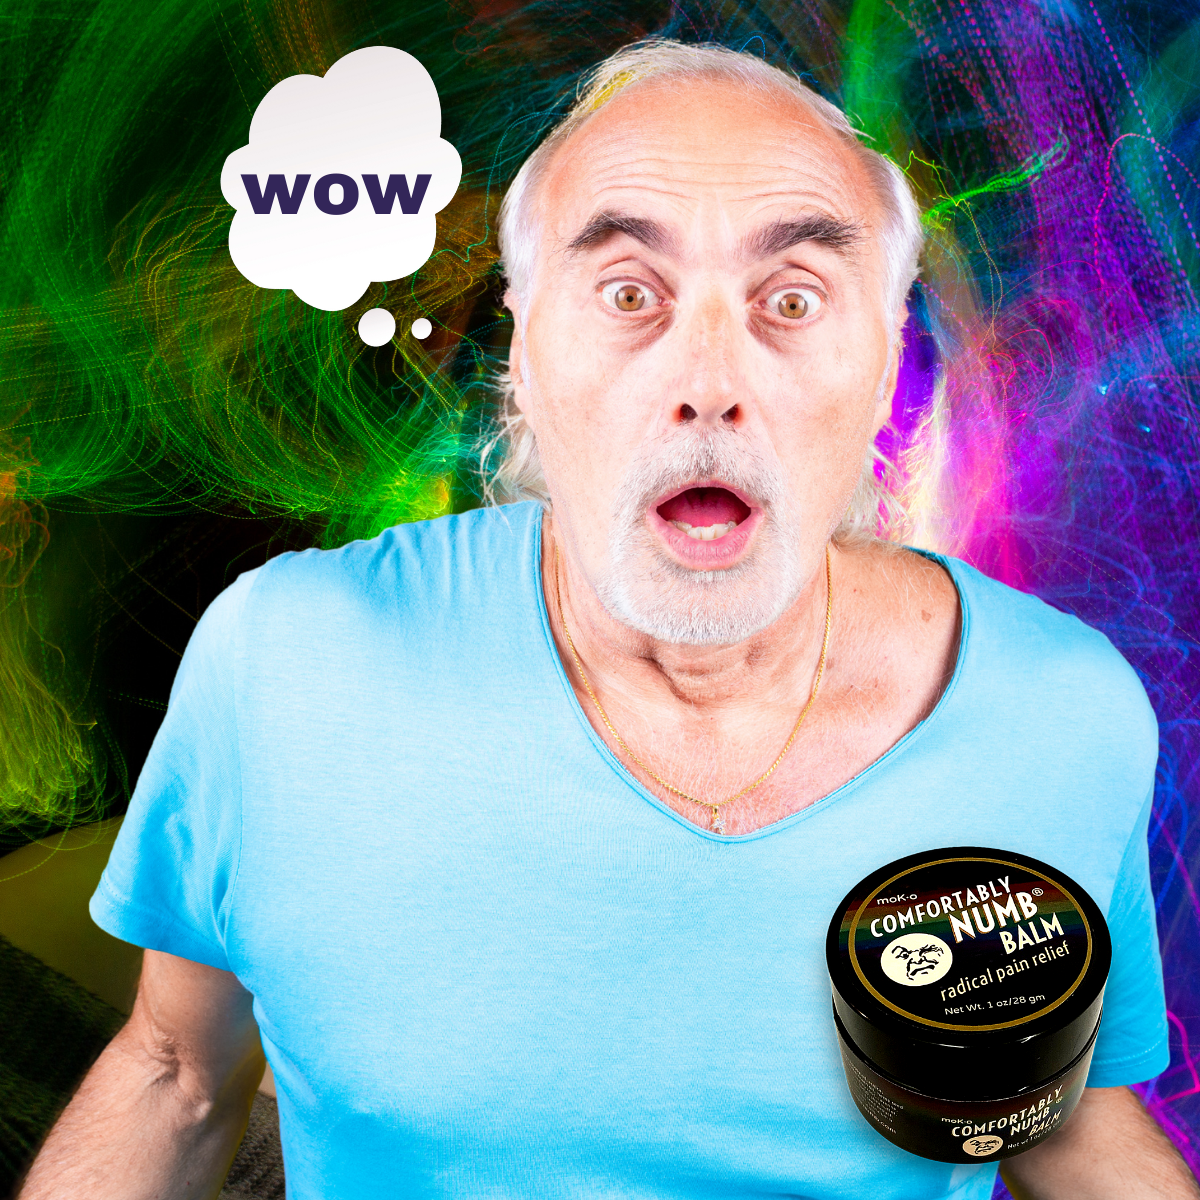 This guy has been around in some numb circles in his day. He may have never been numbed like this before, though.  Comfortably Numb® pain relieving balm will help you forget your pain and your problems and let you relax and live the good life. 